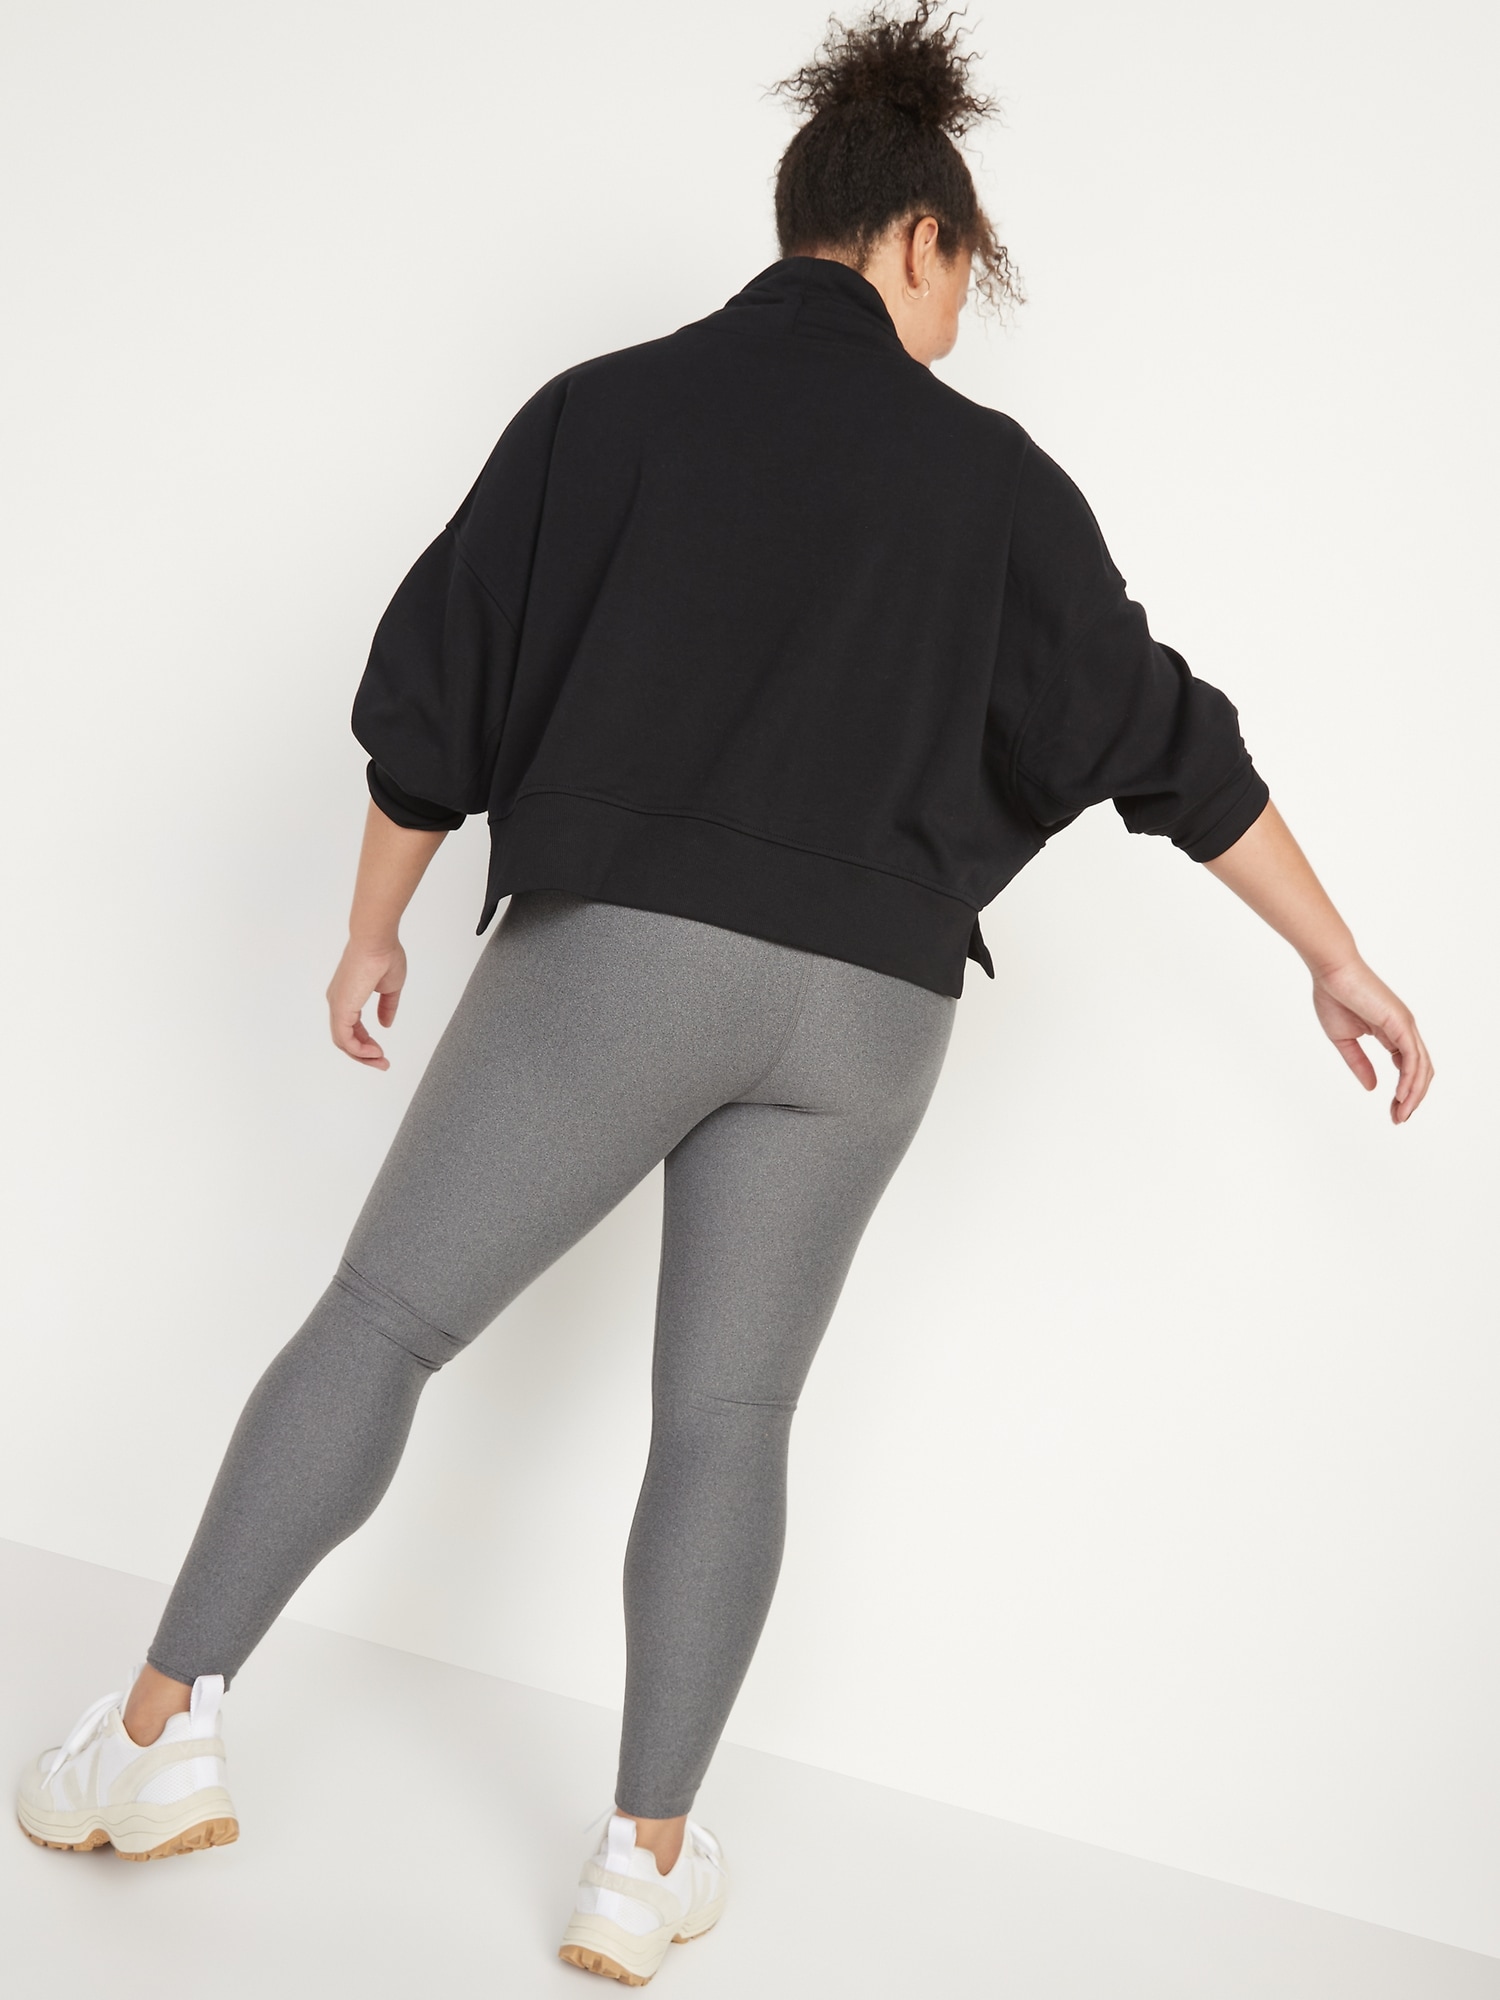 The #1 signature legging from our Core collection. The WOTS tight is  ultra-high waisted, 100% jiggle free & crafted from our Supplex…